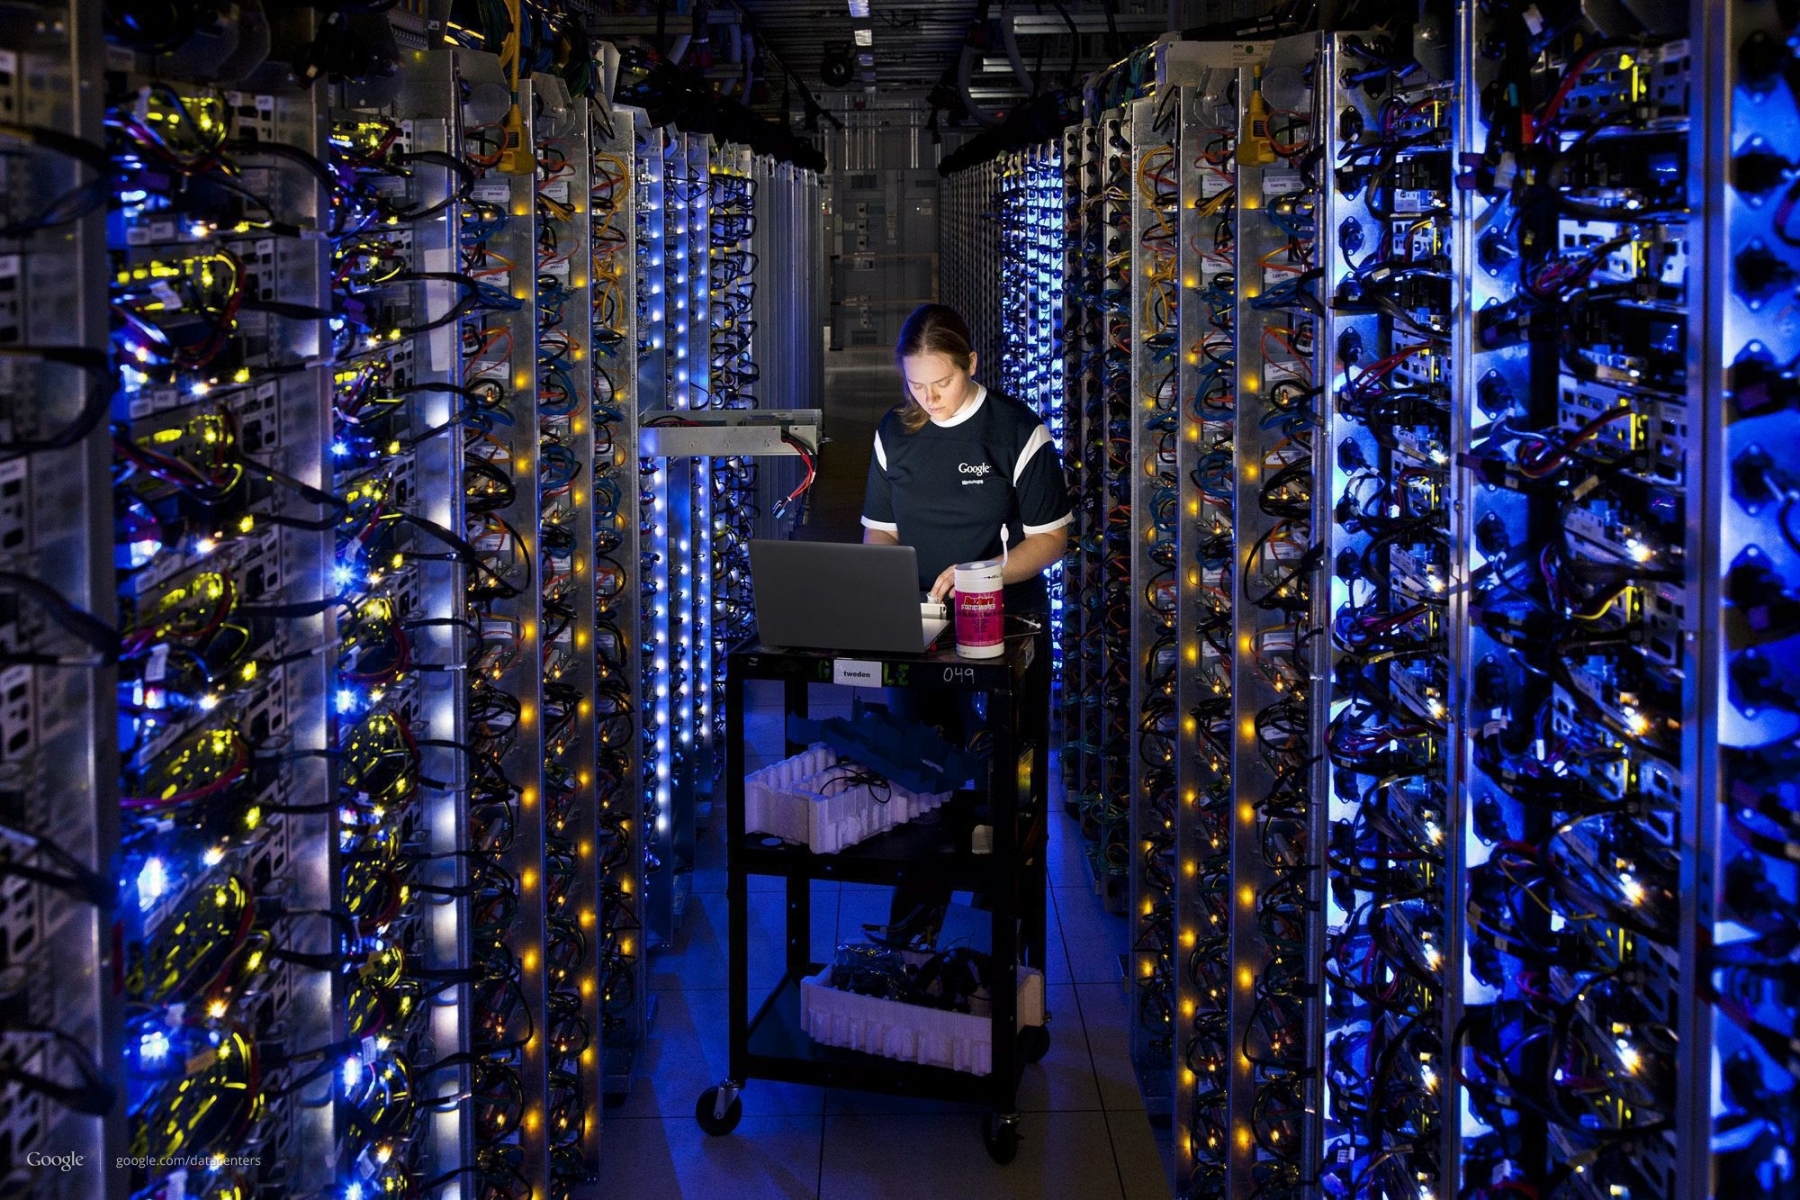 epa03438732 An undated handout photo provided by Google on 19 October 2012 shows Google technician Denise Hardwood diagnosing an overheated CPU, at a Google Data Center in the Dalles, Oregon, USA. Shares in Google slumped badly 18 October, forcing trading to be suspended when a negative earnings report was accidentally released early, shocking investors with its report of lower profits and advertising prices. Shares in the high-flying company dropped more than 9 per cent as it emerged that the internet giant missed market expectations. Trading resumed around 90 minutes before the end of the day, and the shares closed 8 per cent down. The quarterly earnings report had been scheduled for release after the close of trading, but Google said in a press release that it had mistakenly been filed by the companyÄôs financial printers RR Donnelley.  EPA/GOOGLE HANDOUT  HANDOUT EDITORIAL USE ONLY/NO SALES USA OREGON GOOGLE DATA CENTER